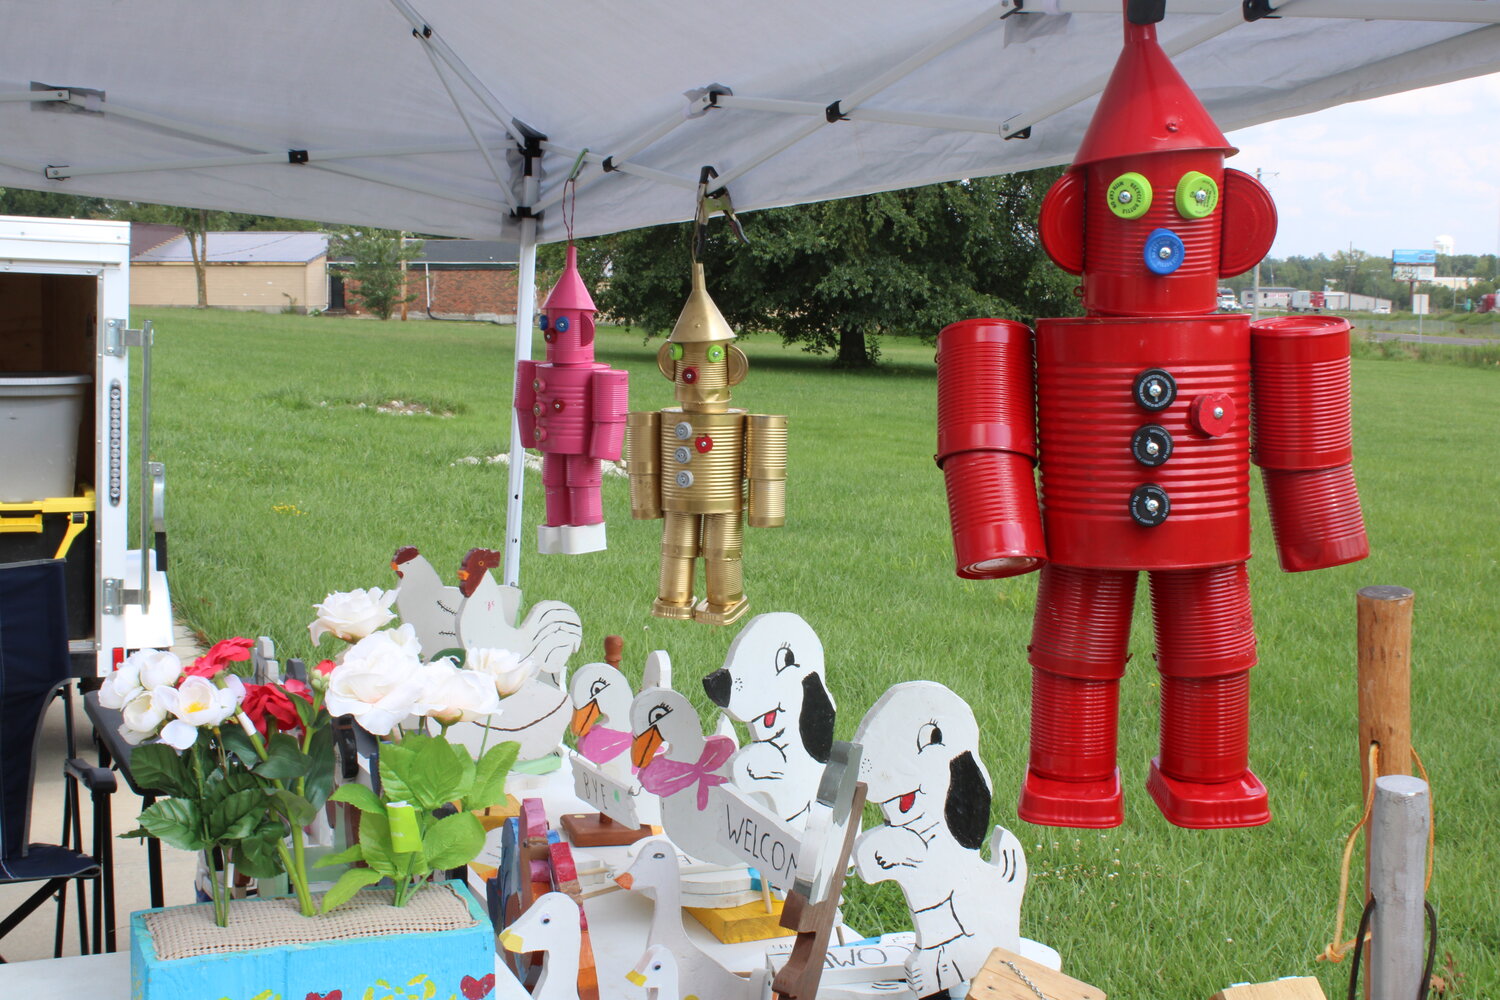 Jerry High had a red tin man adoring his booth during the Aug. 8 market in Warrenton.